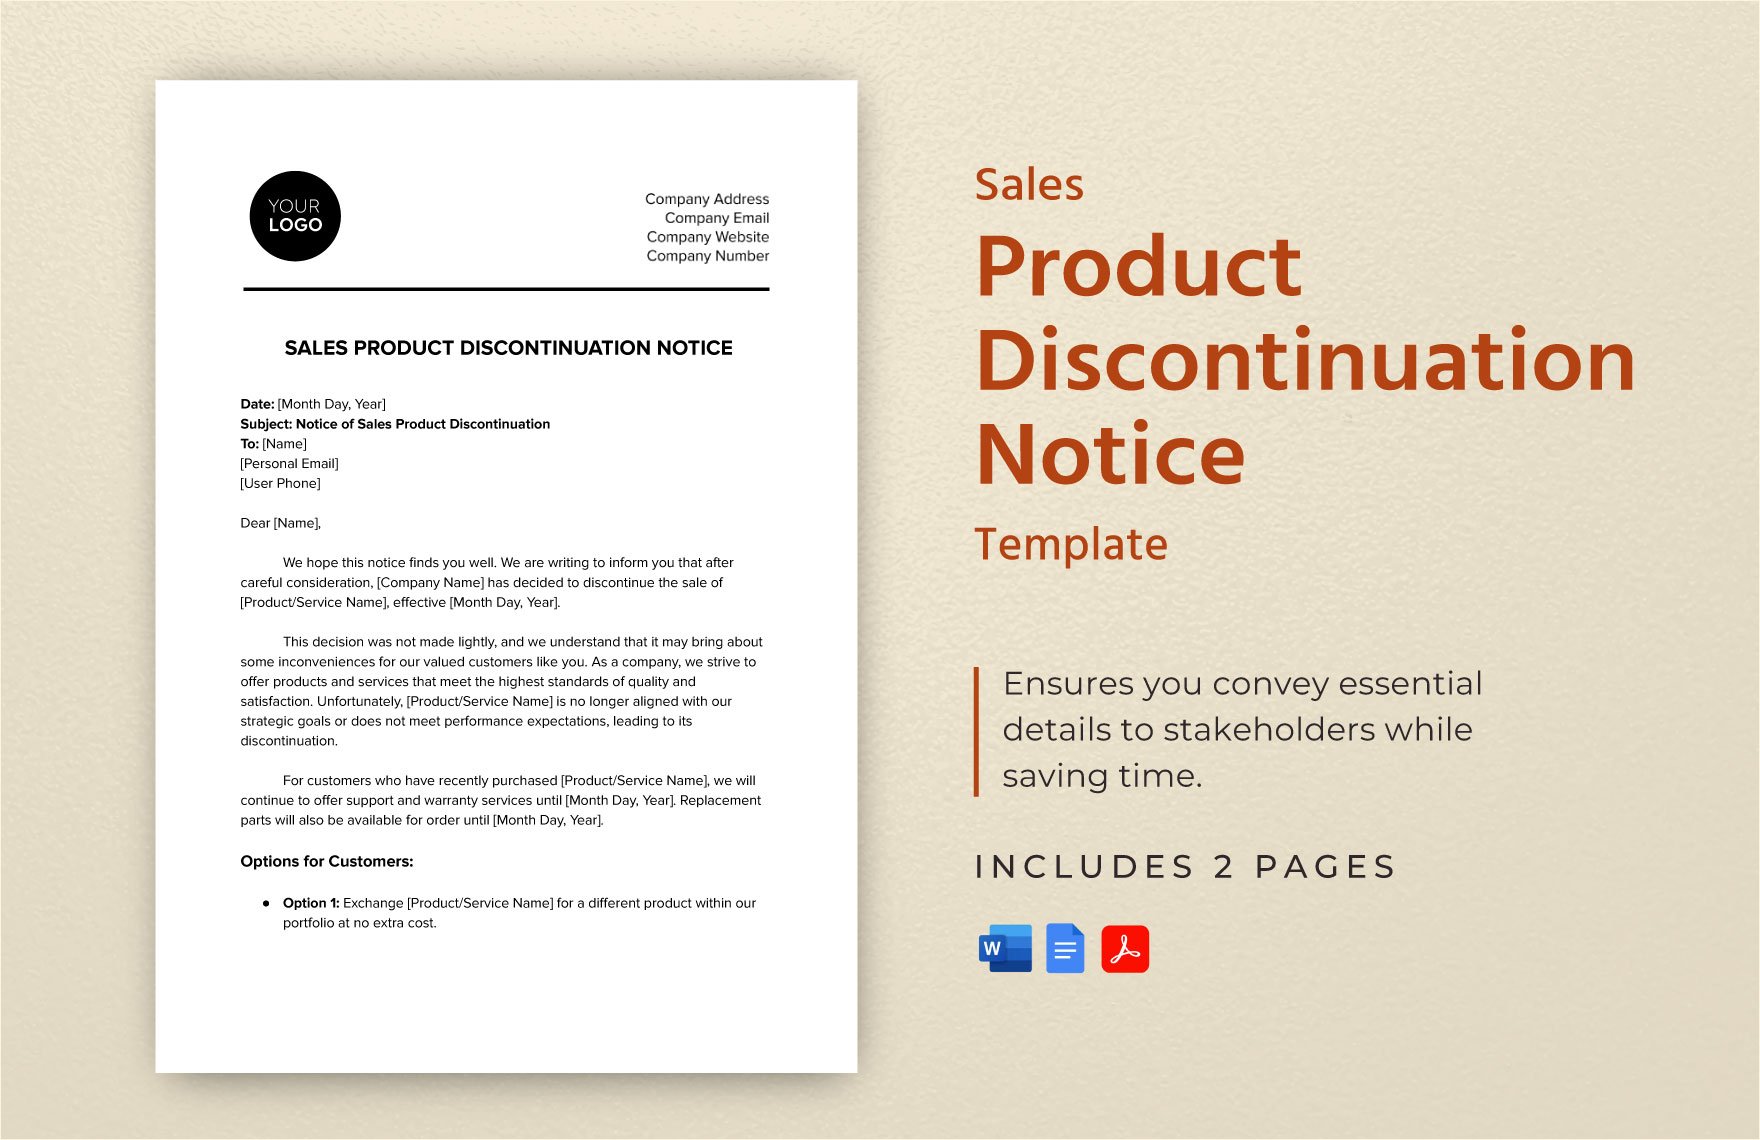 Sales Product Discontinuation Notice Template in Word, Google Docs, PDF